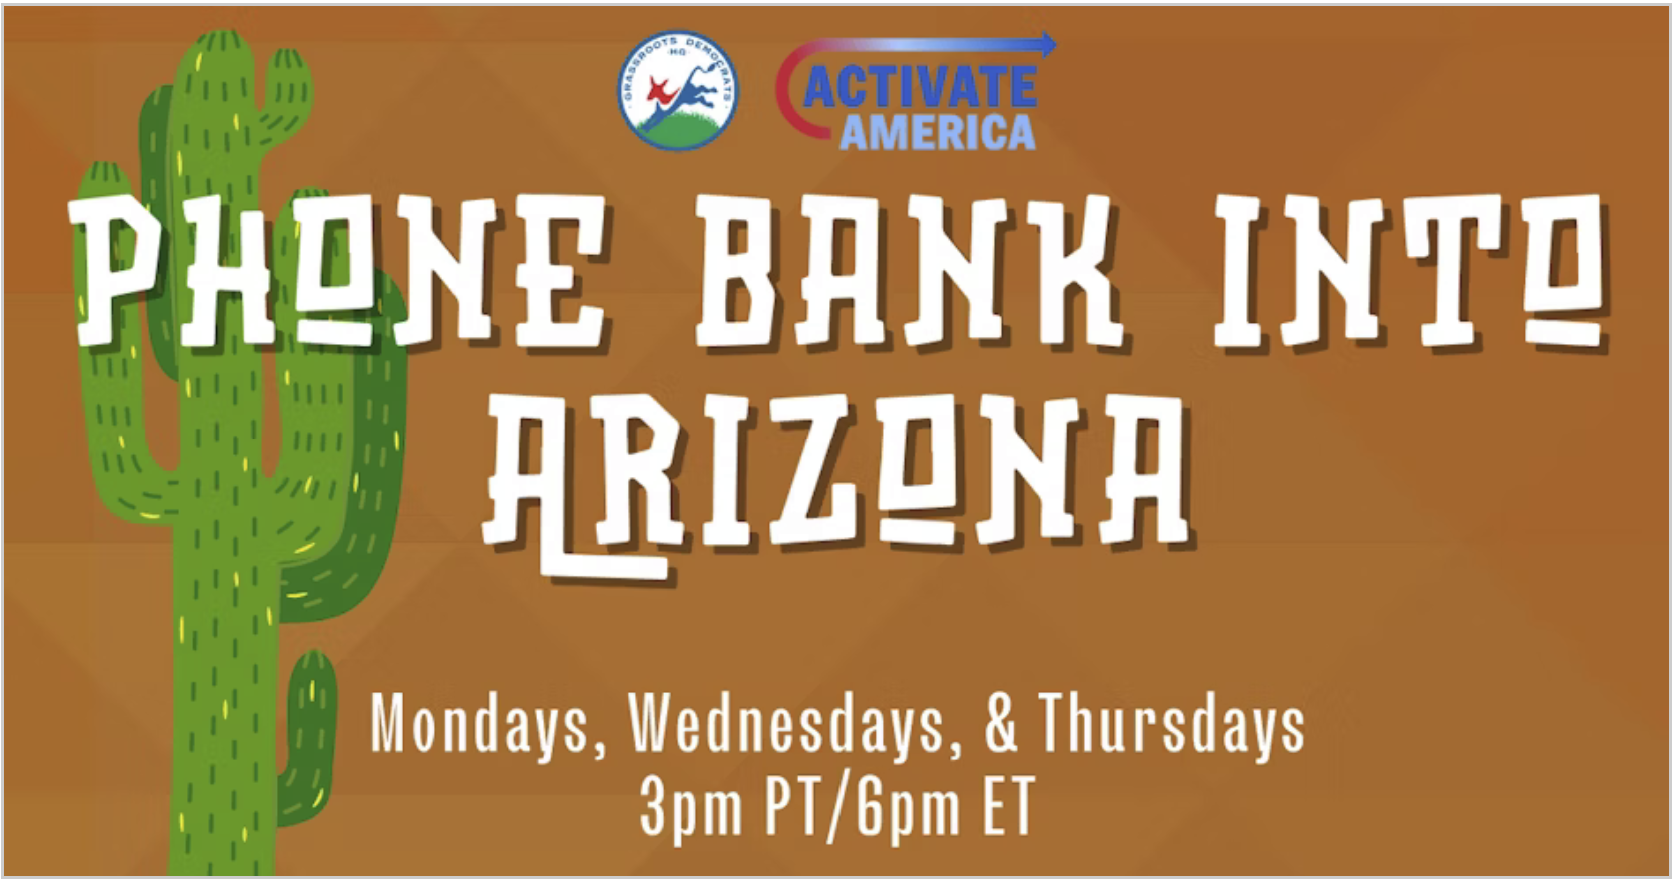 Phone bank into Arizona. Mon, Weds, and Thurs 3 pm PST, 6 pm EST.